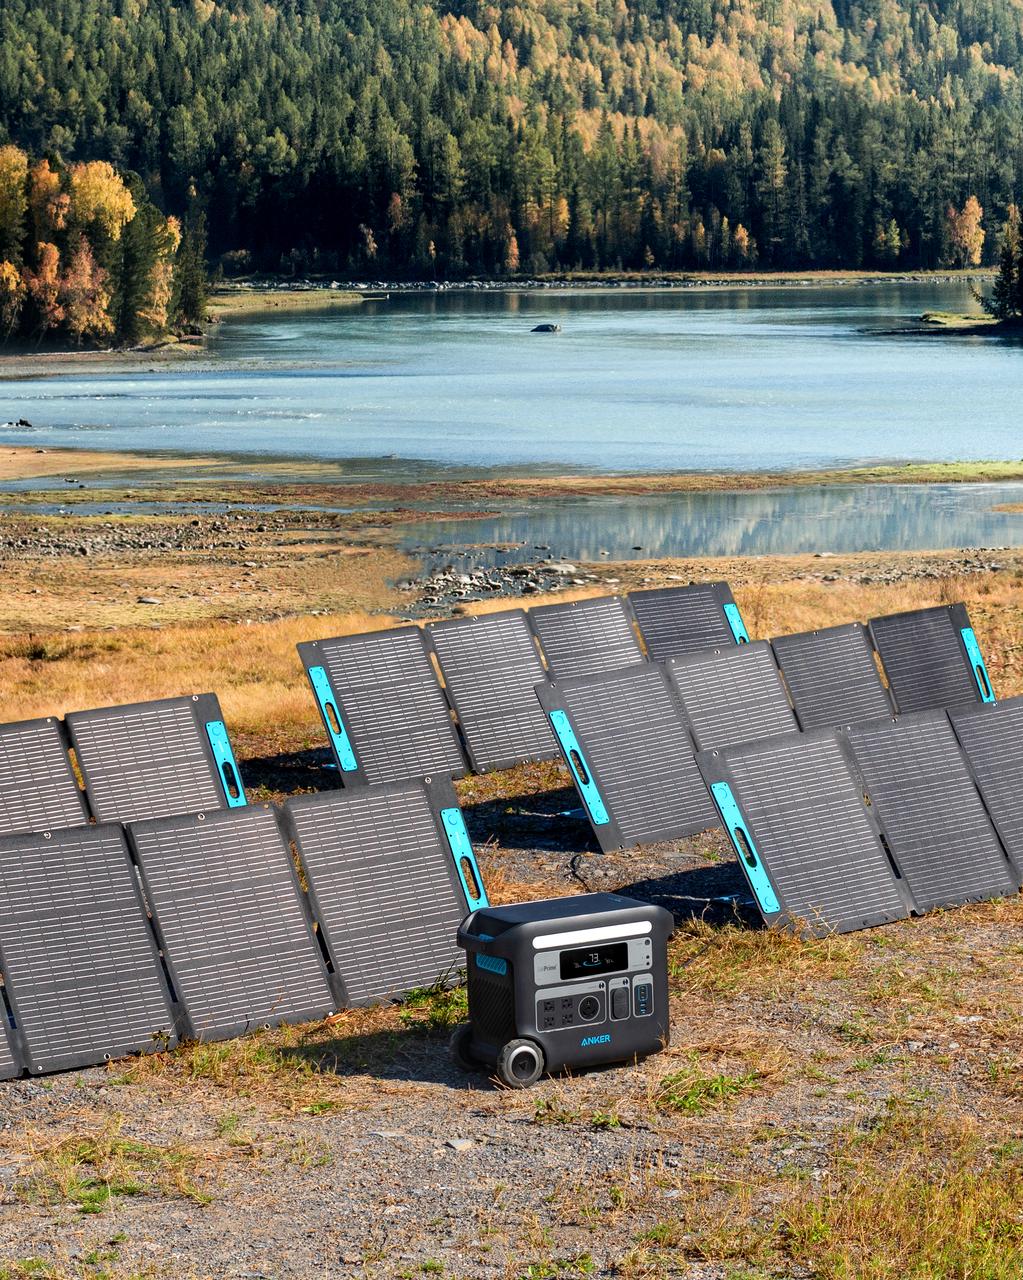 Solar generators are an easy and efficient source of off-grid power for homesteads